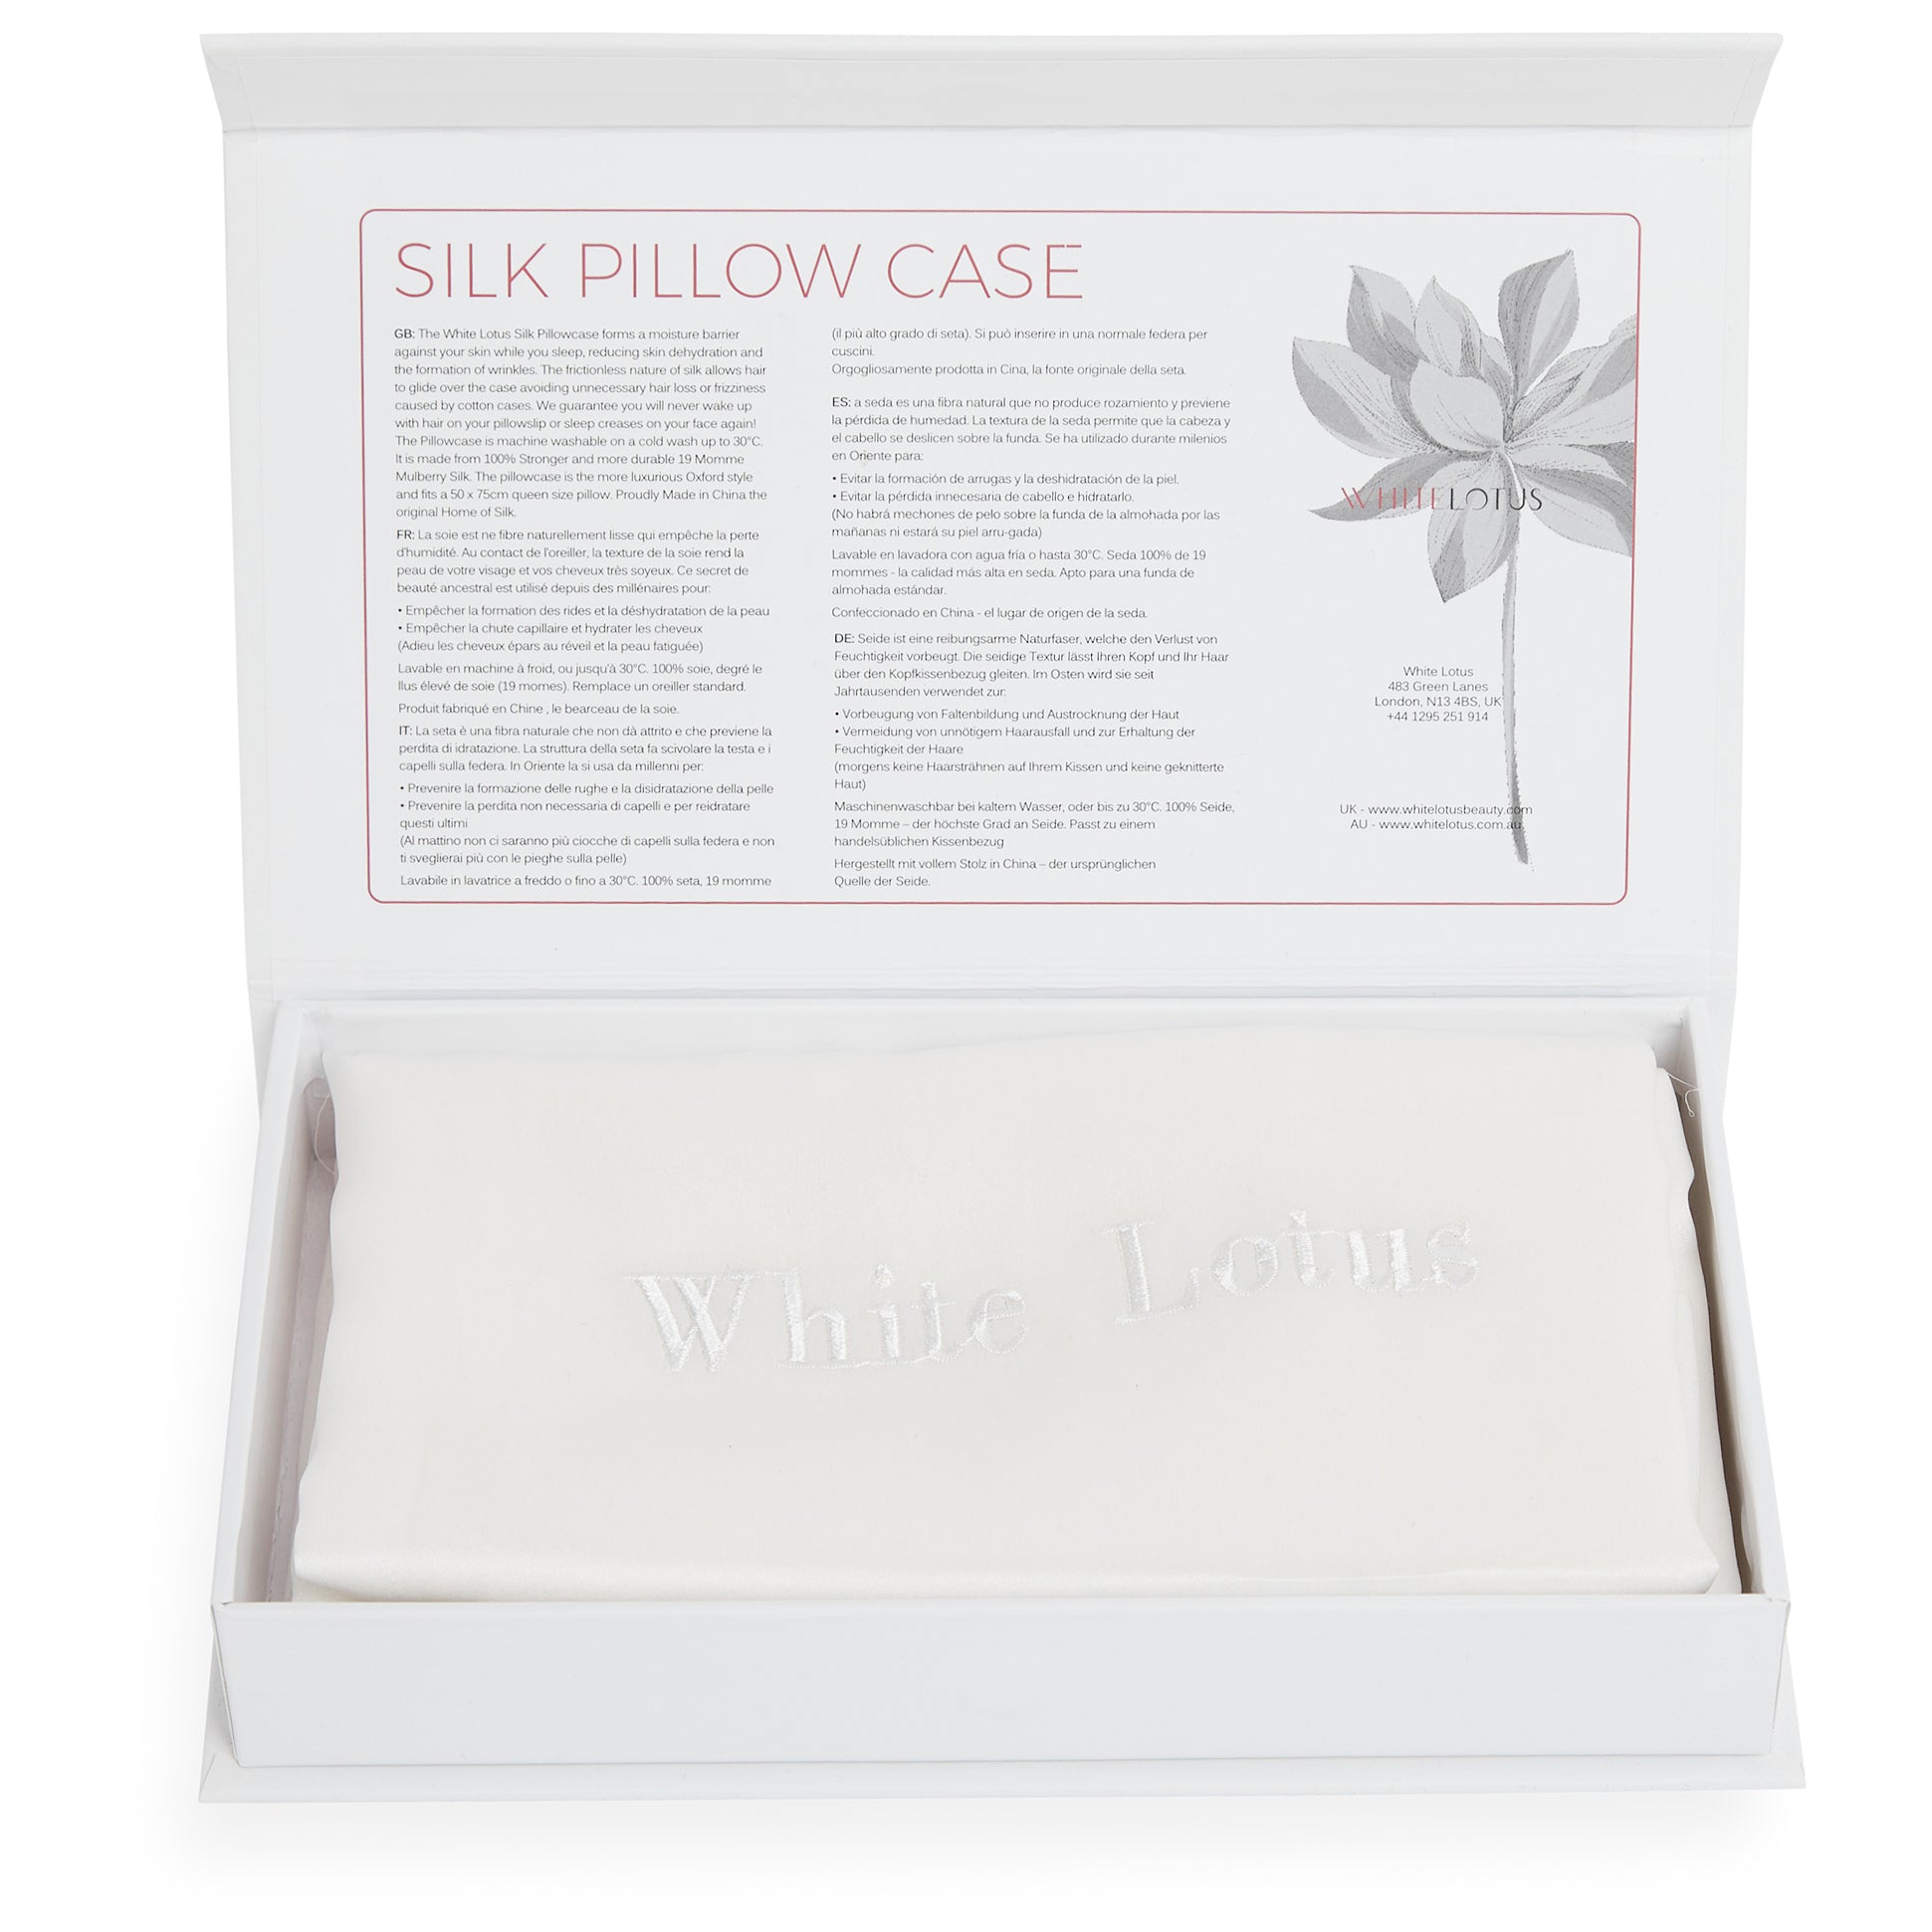 19 Momme Pure Silk Pillowcase  - Reduces Wrinkles and Hair Loss